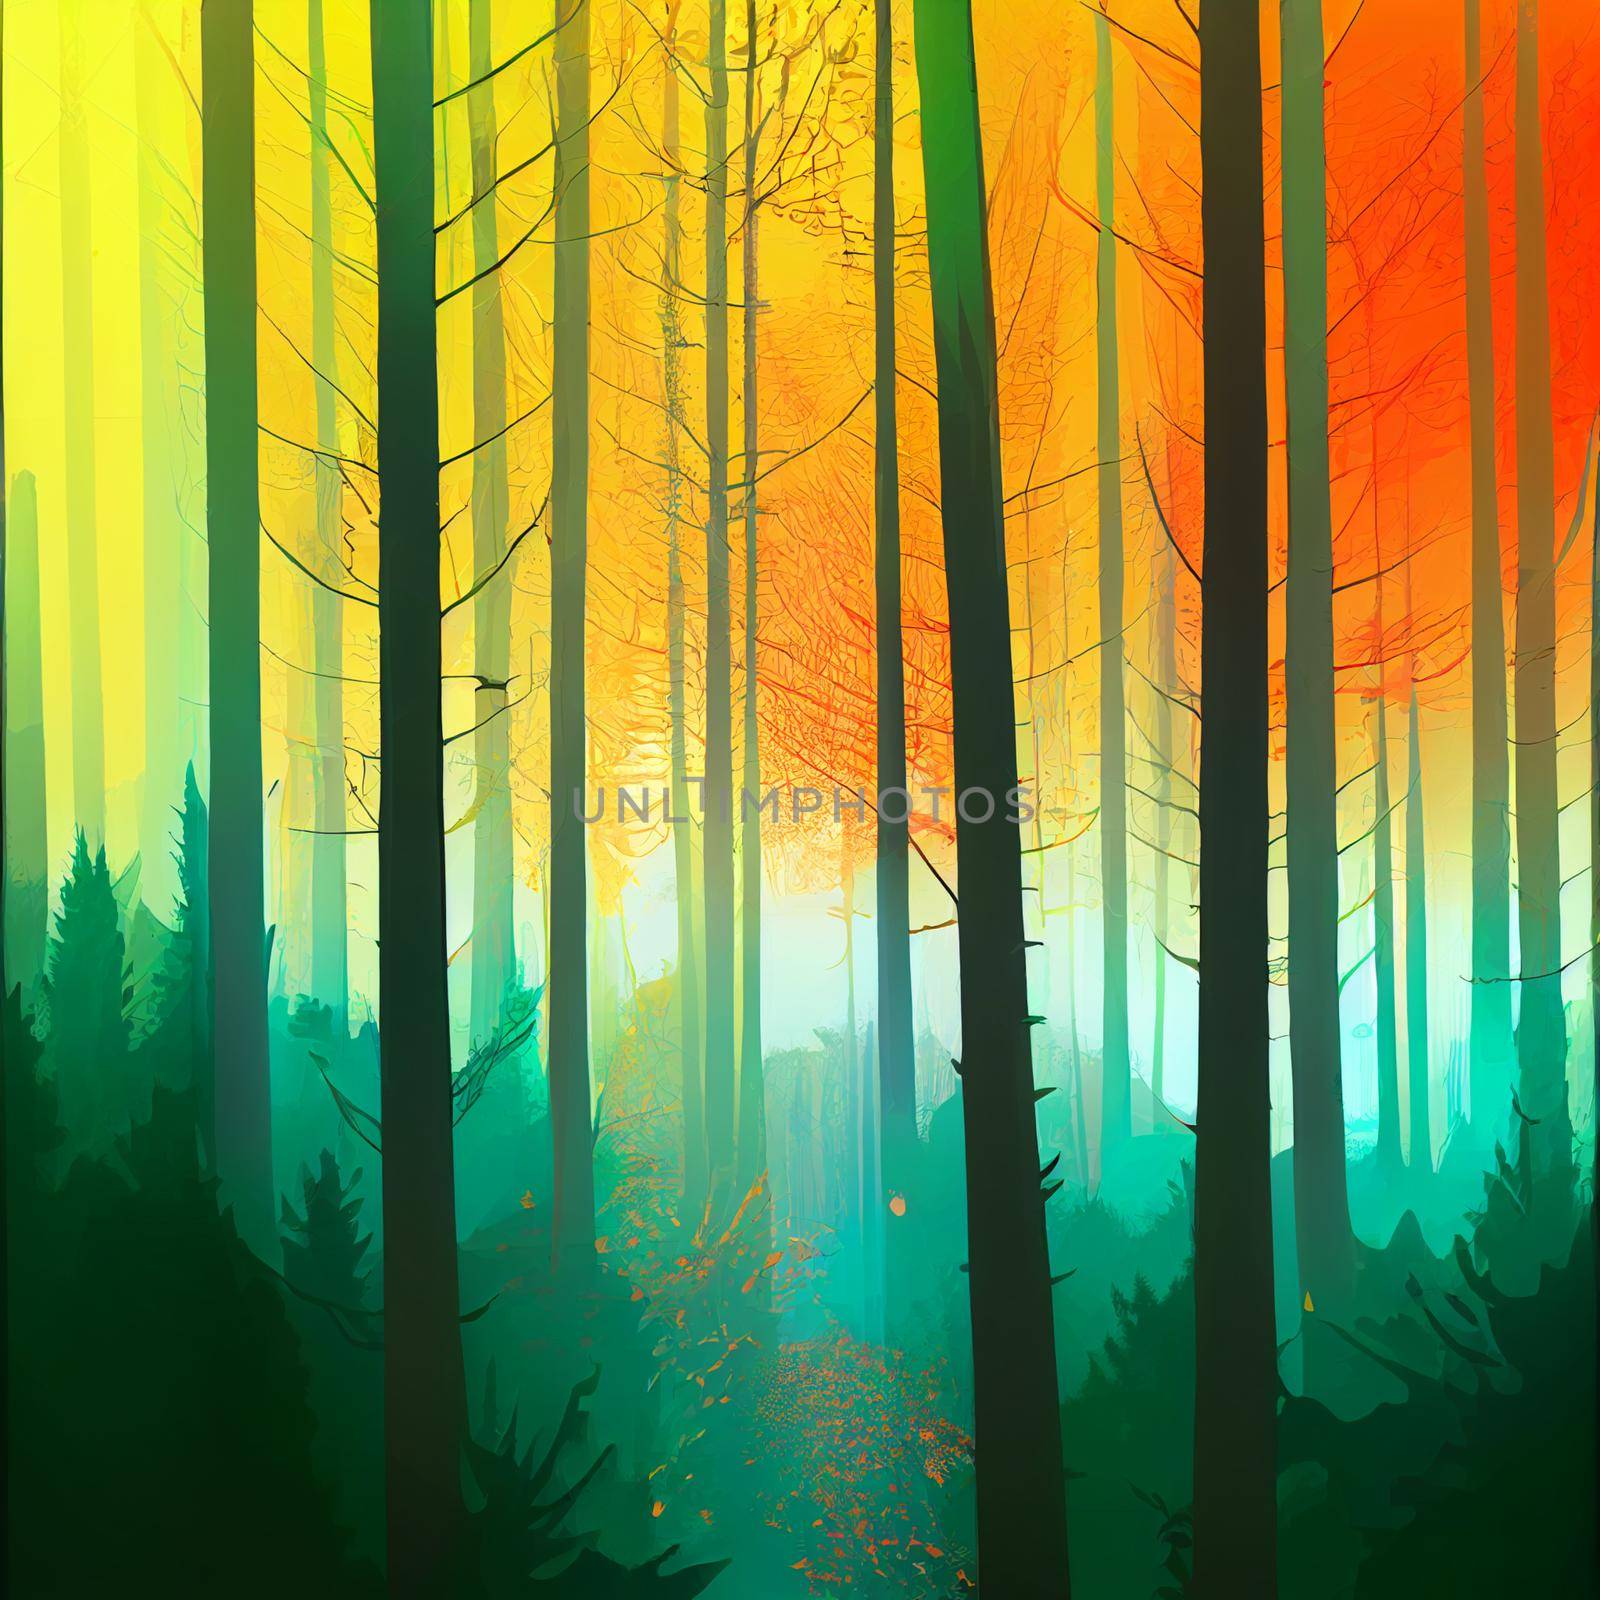 Illustration of a Graphic image of the autumn forest